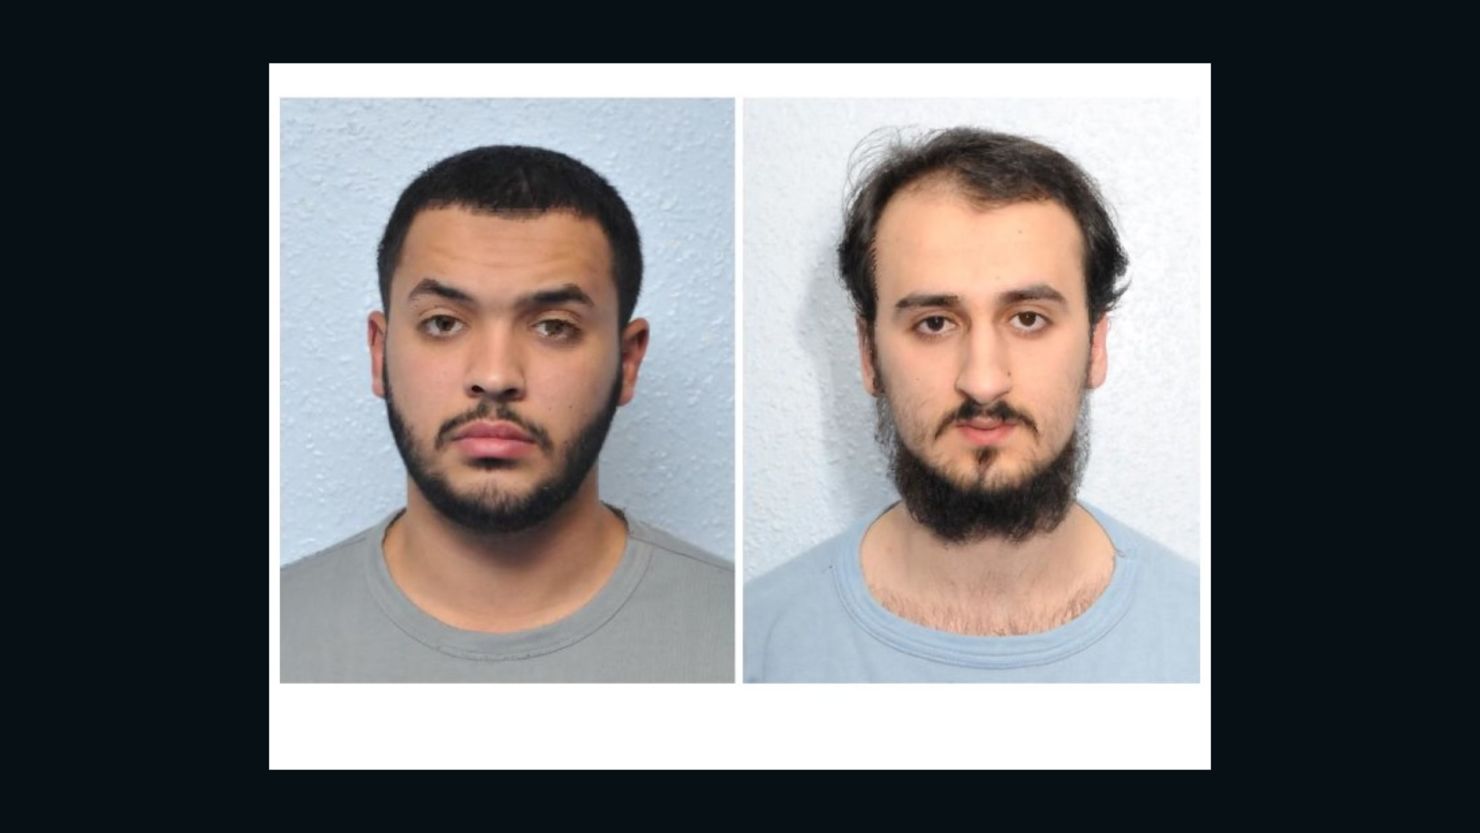 Tarik Hassane (left) and Suhaib Majeed (right) planned a shooting in London, authorities said. 